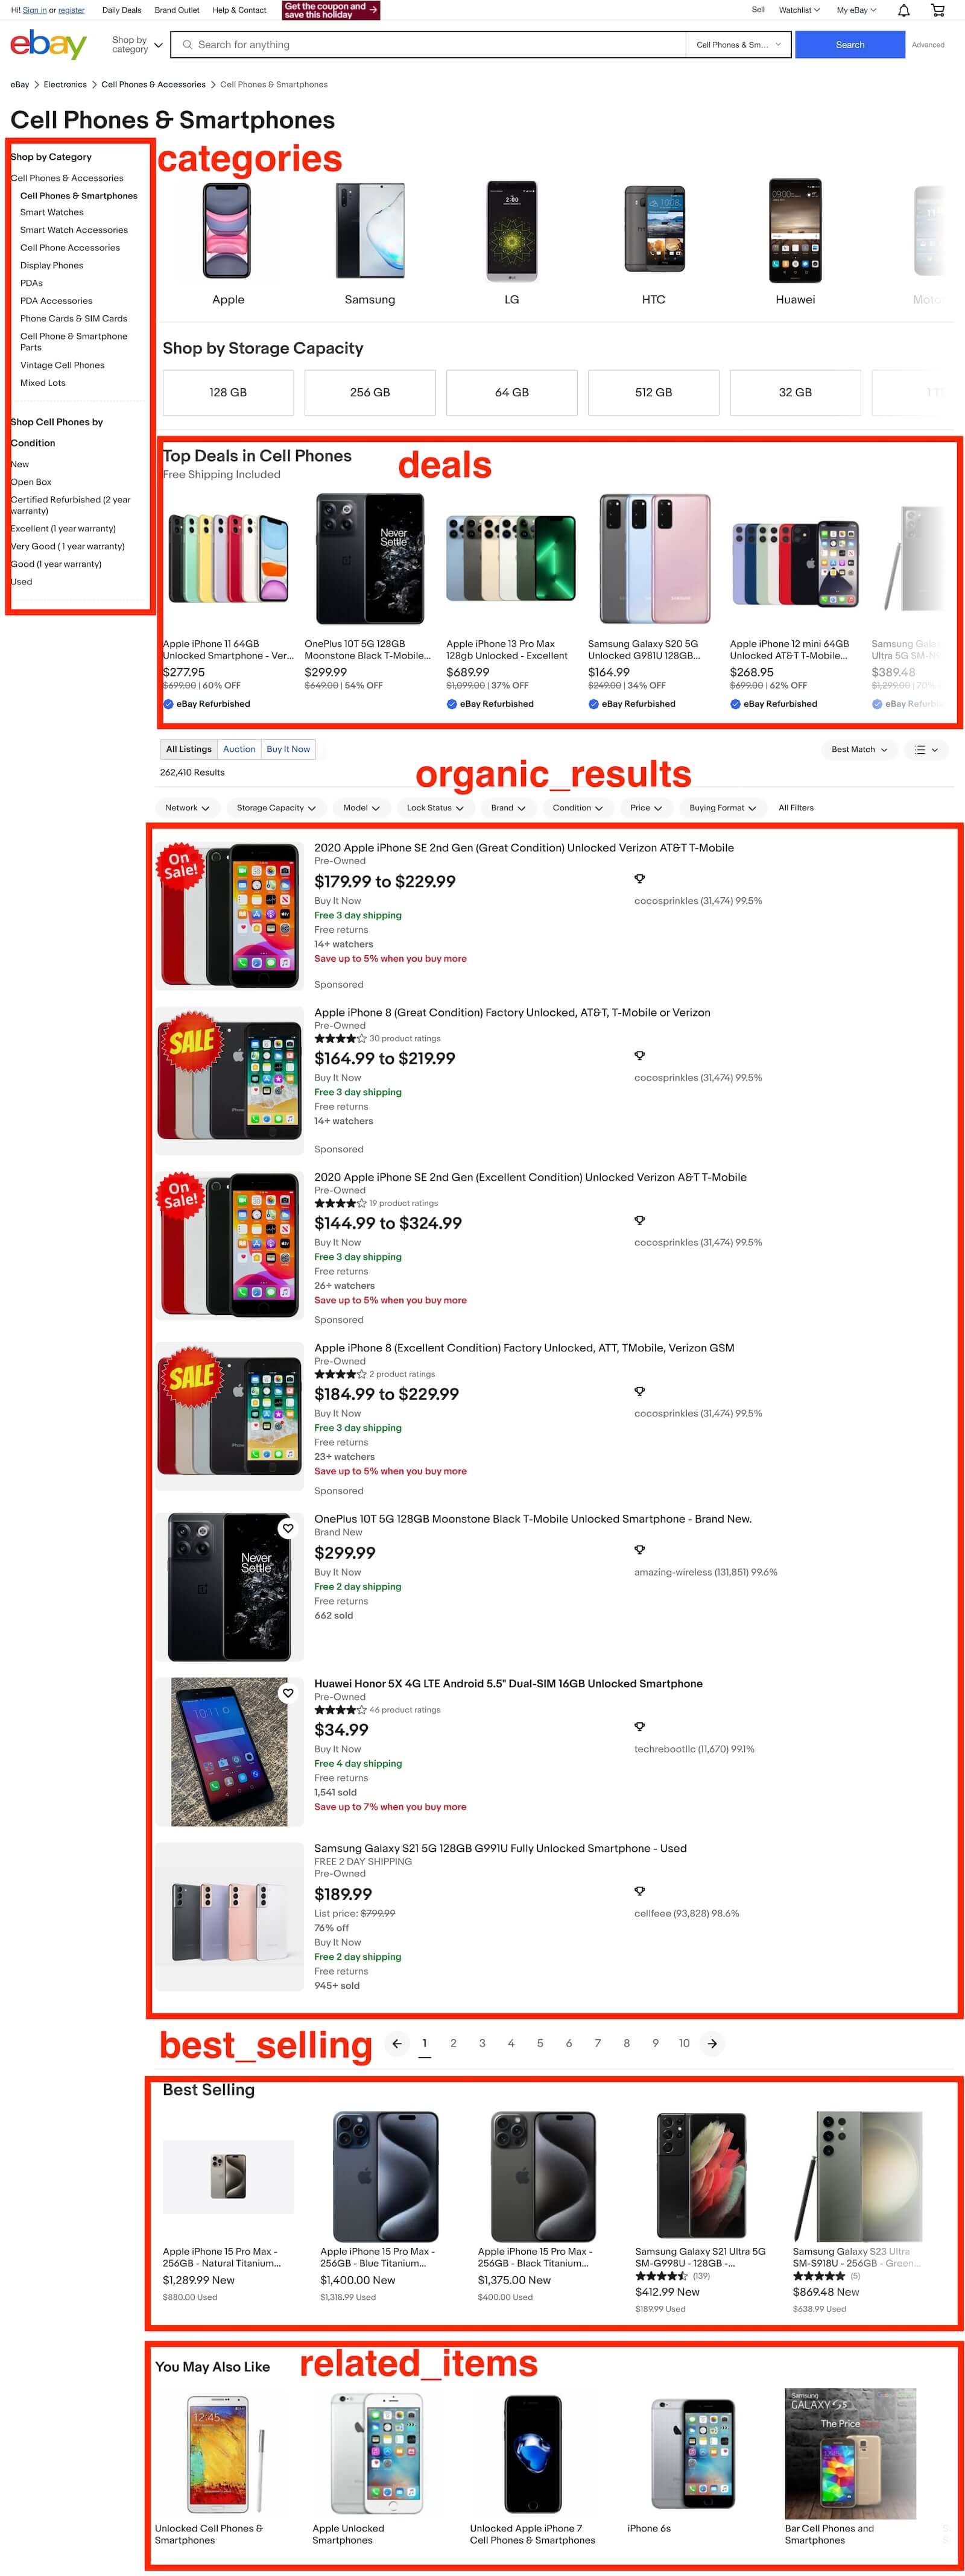 Example results for search only by category_id: 9355 (Cell Phones &amp; Smarthphones)